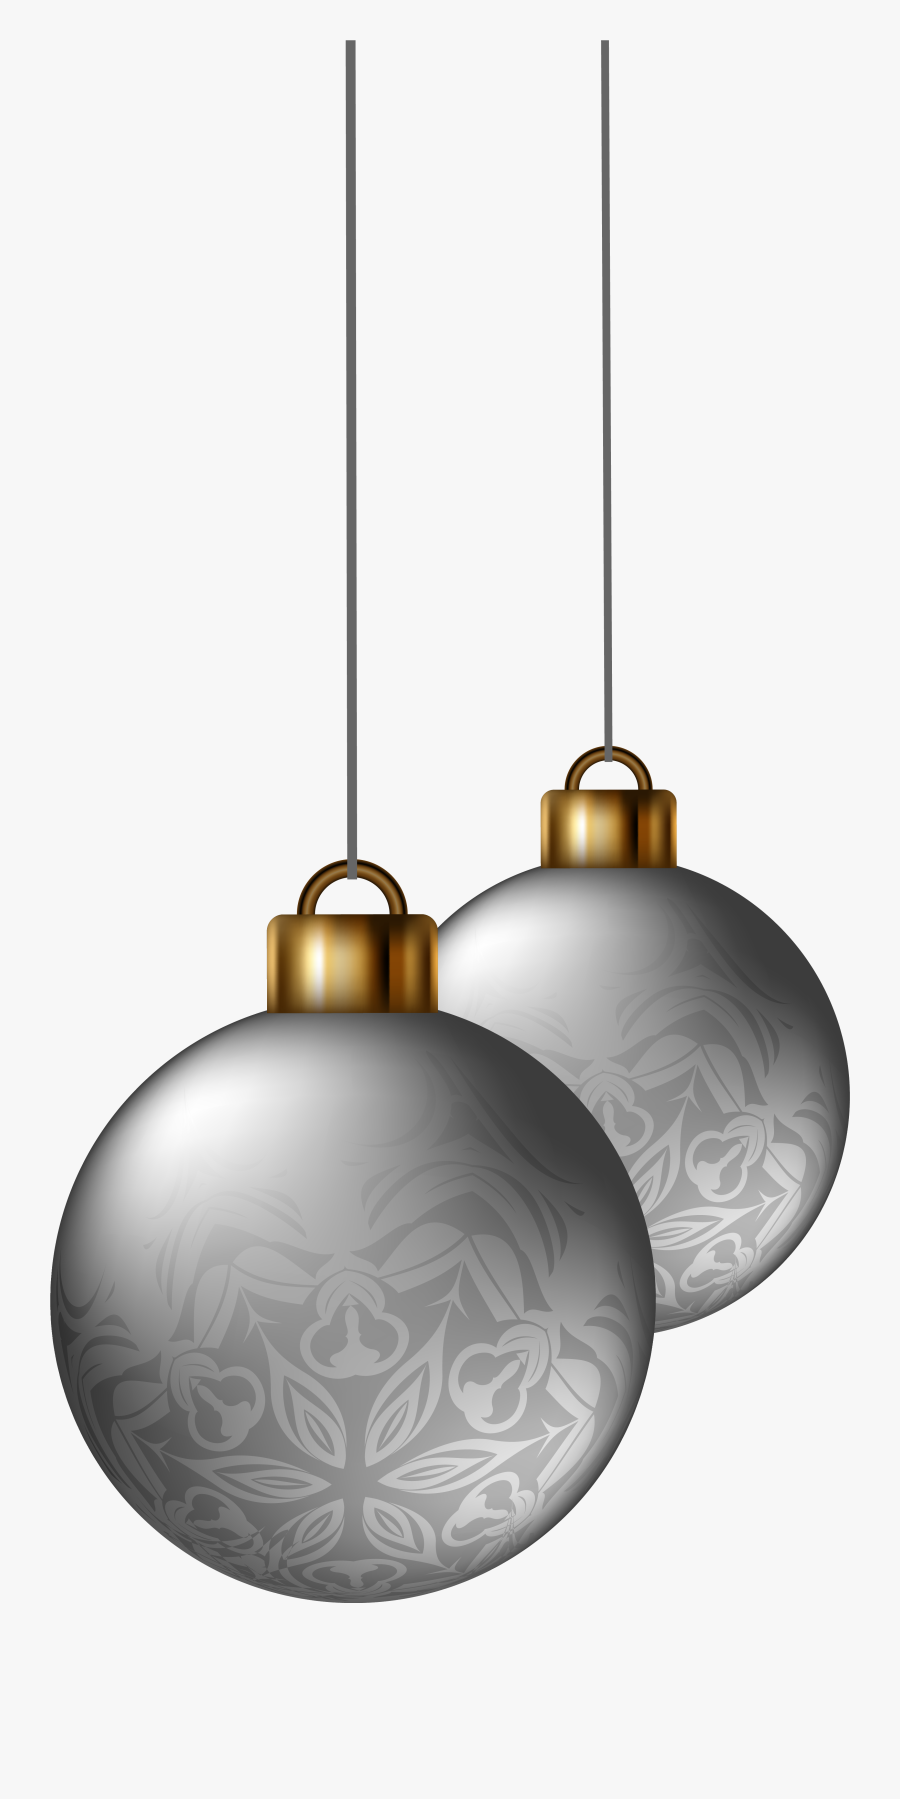 Silver Christmas Balls Png Clipart Image - Silver Christmas Balls In Trees, Transparent Clipart